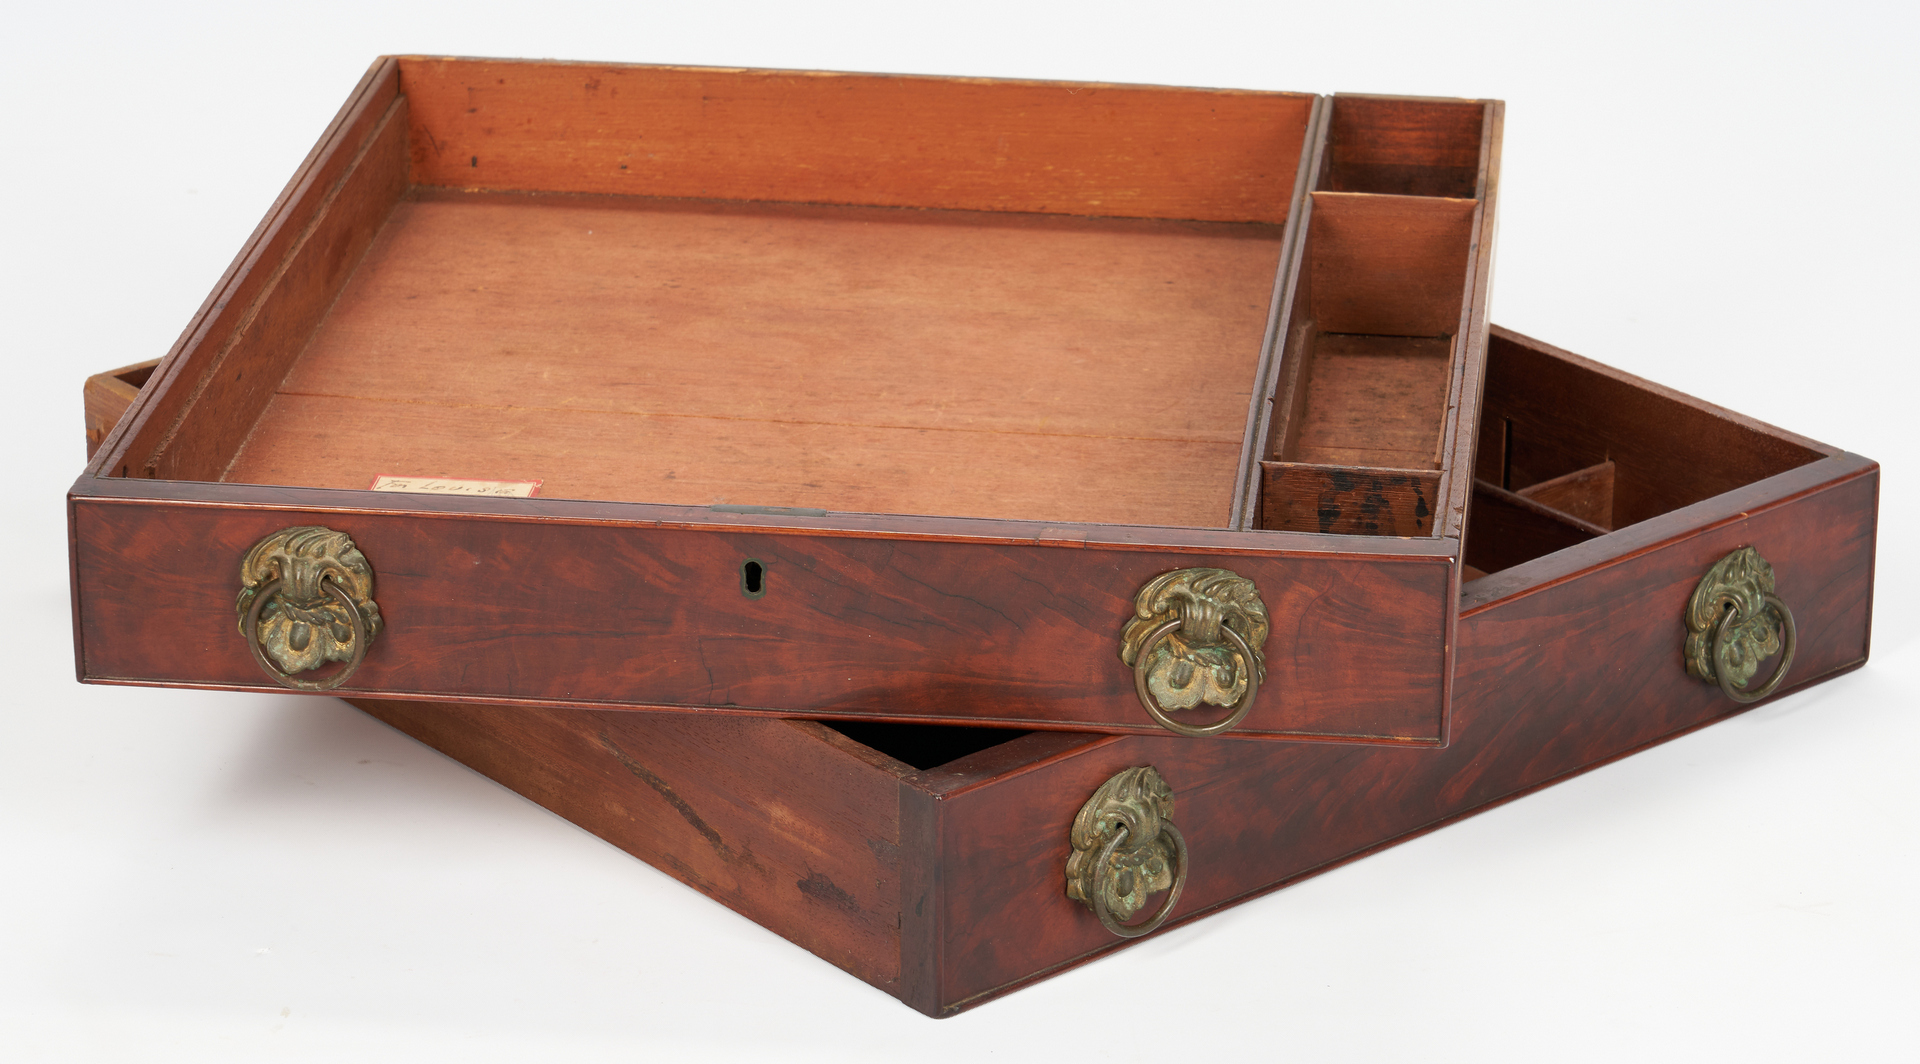 Lot 344: American Classical Dropleaf Sewing Table